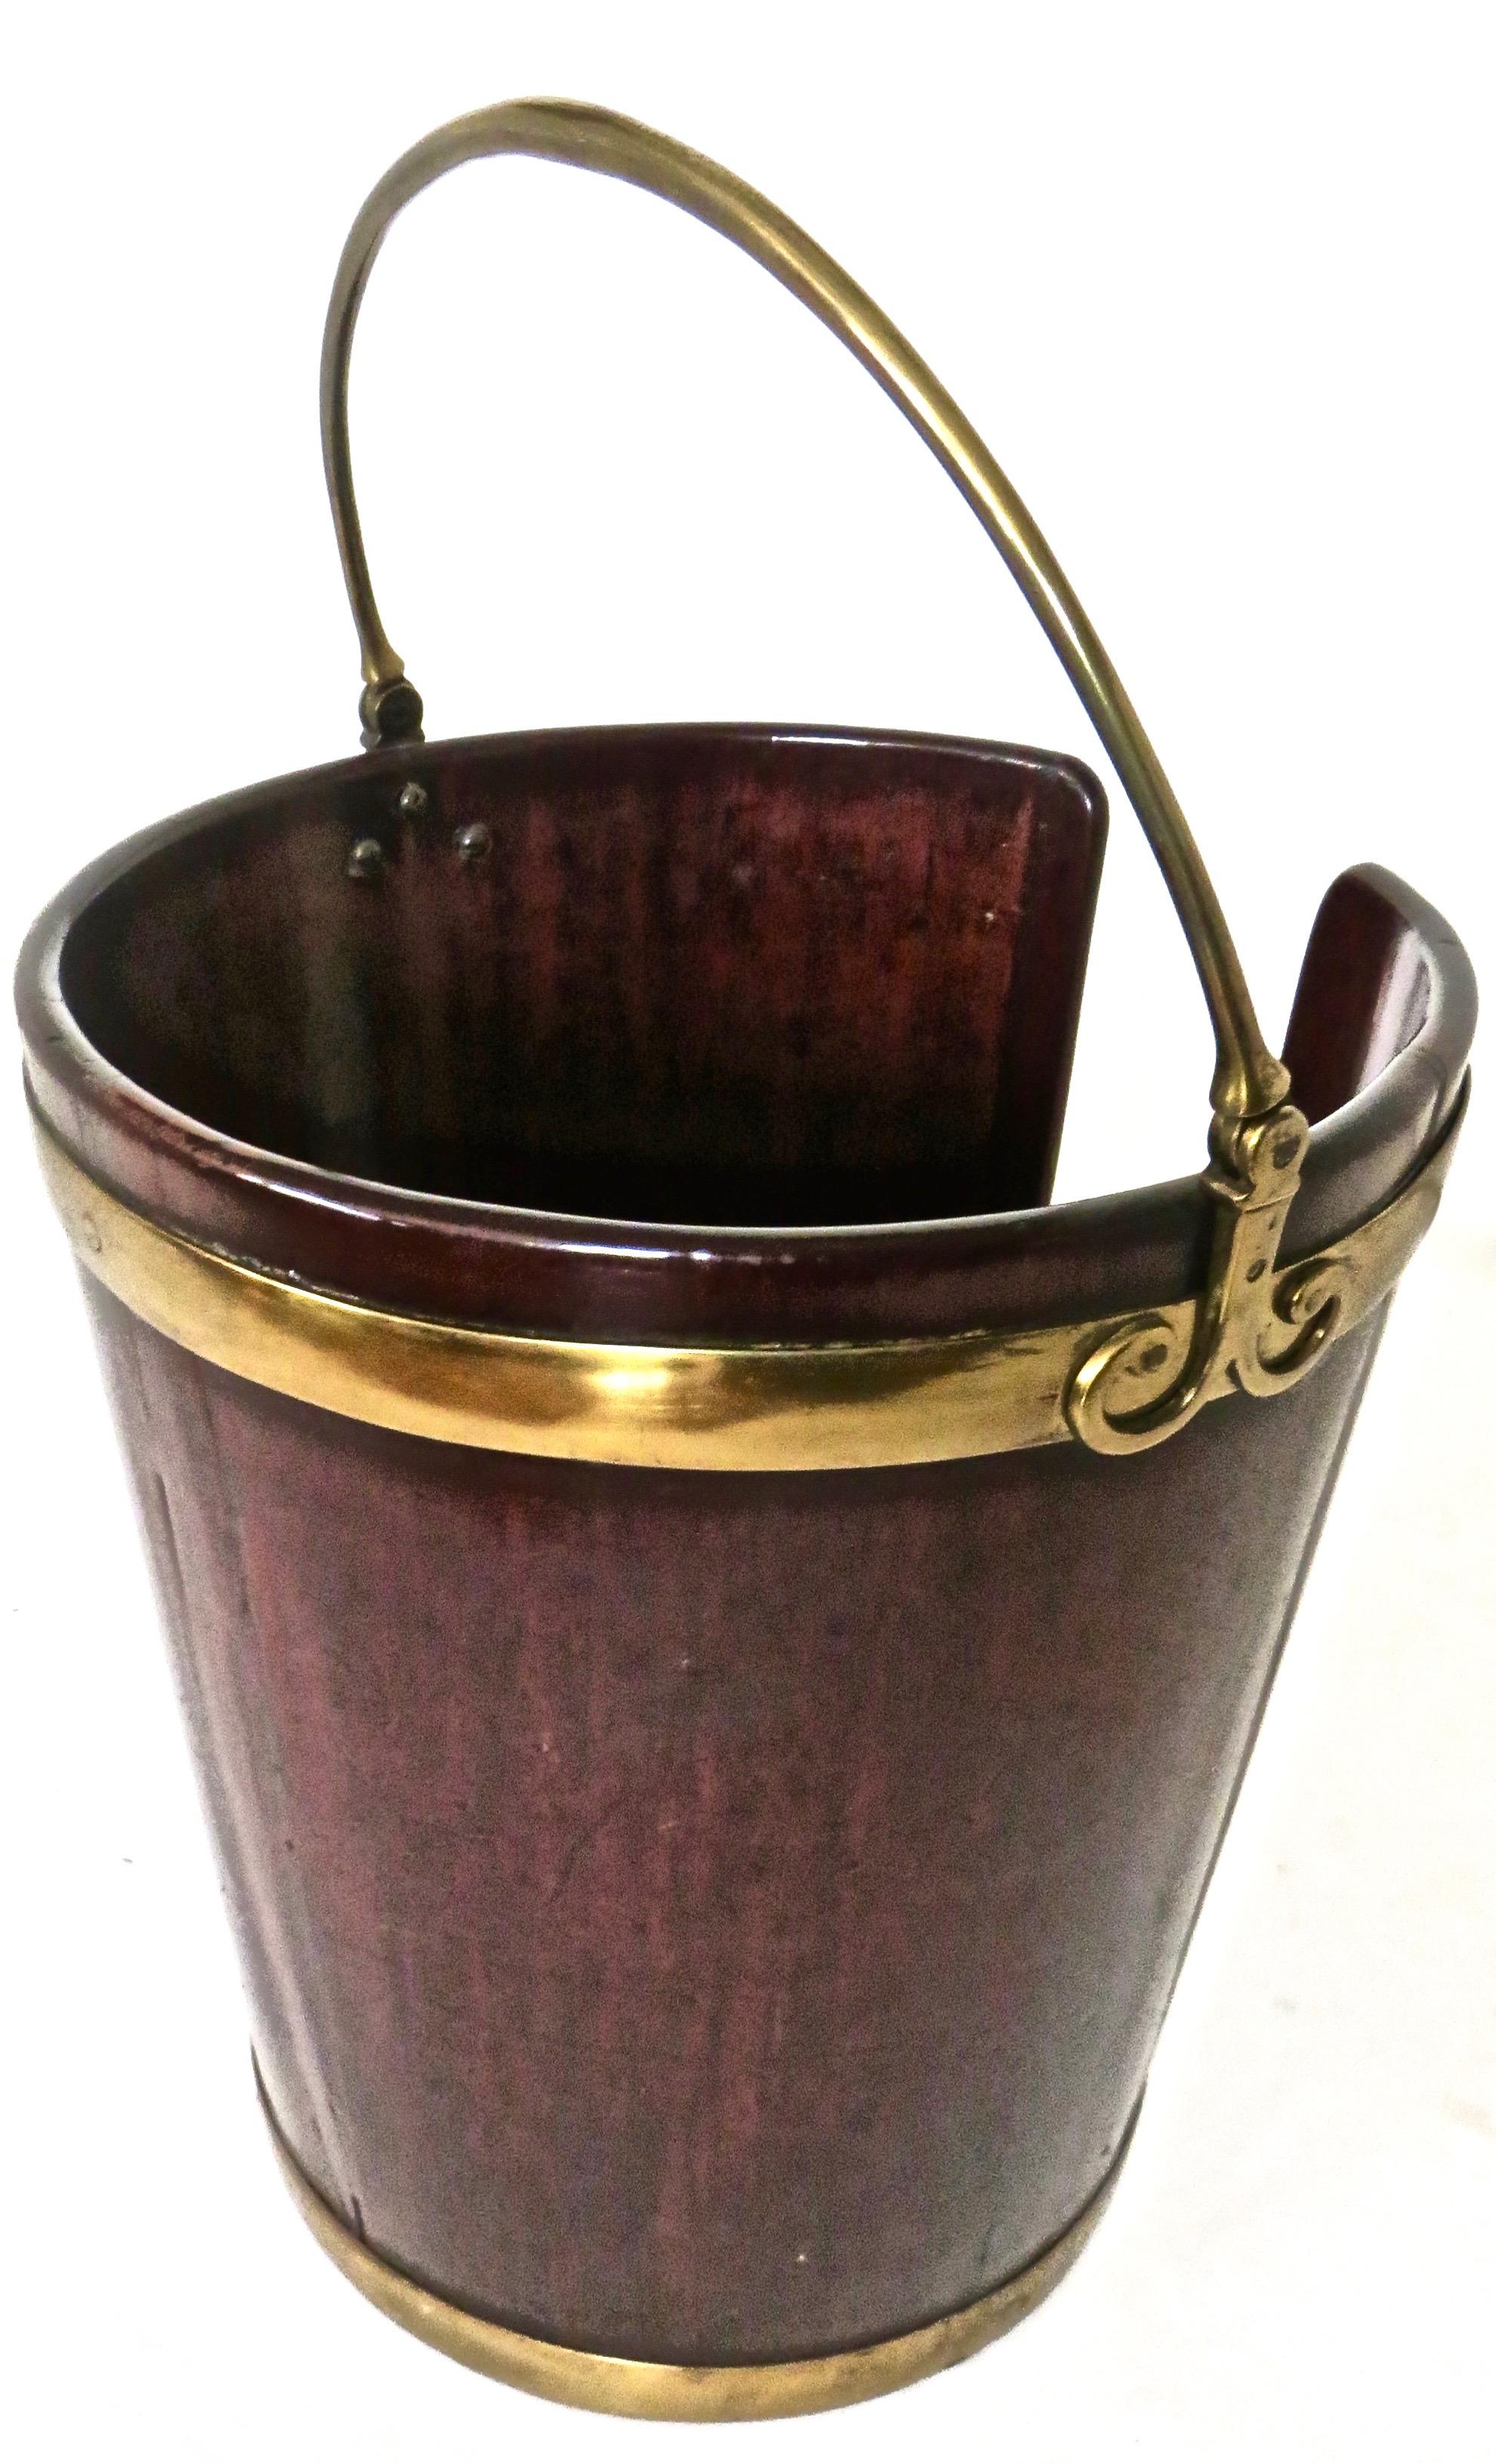 Late 18th Century Pair of George III Mahogany Brass-Bound Buckets; 1 Peat and 1 Plate, English